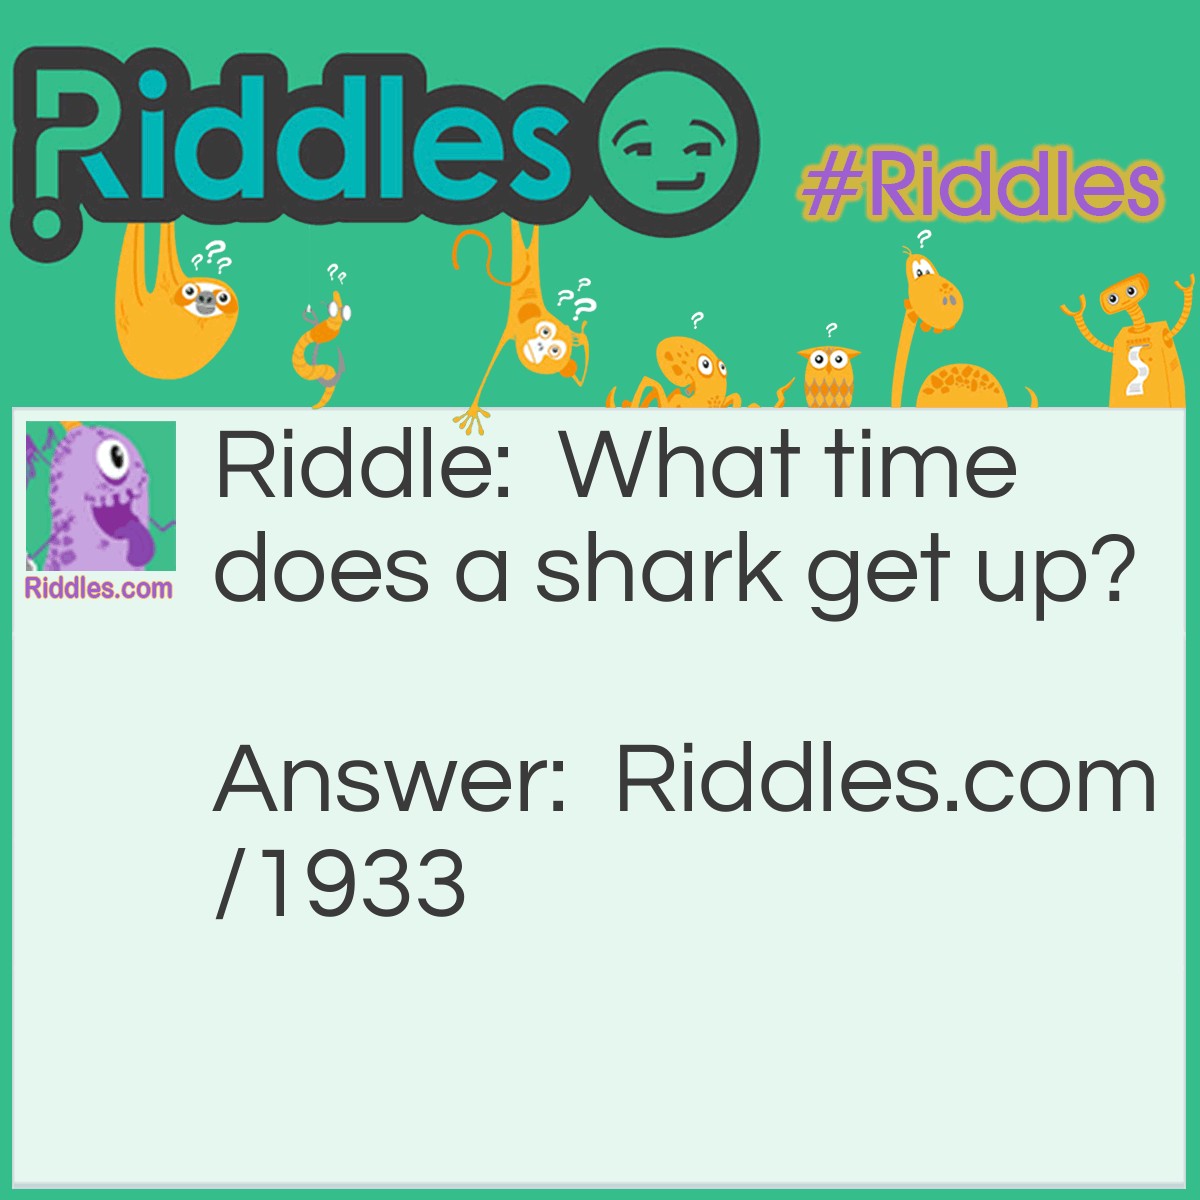 Riddle: What time does a shark get up? Answer: Ate o'clock